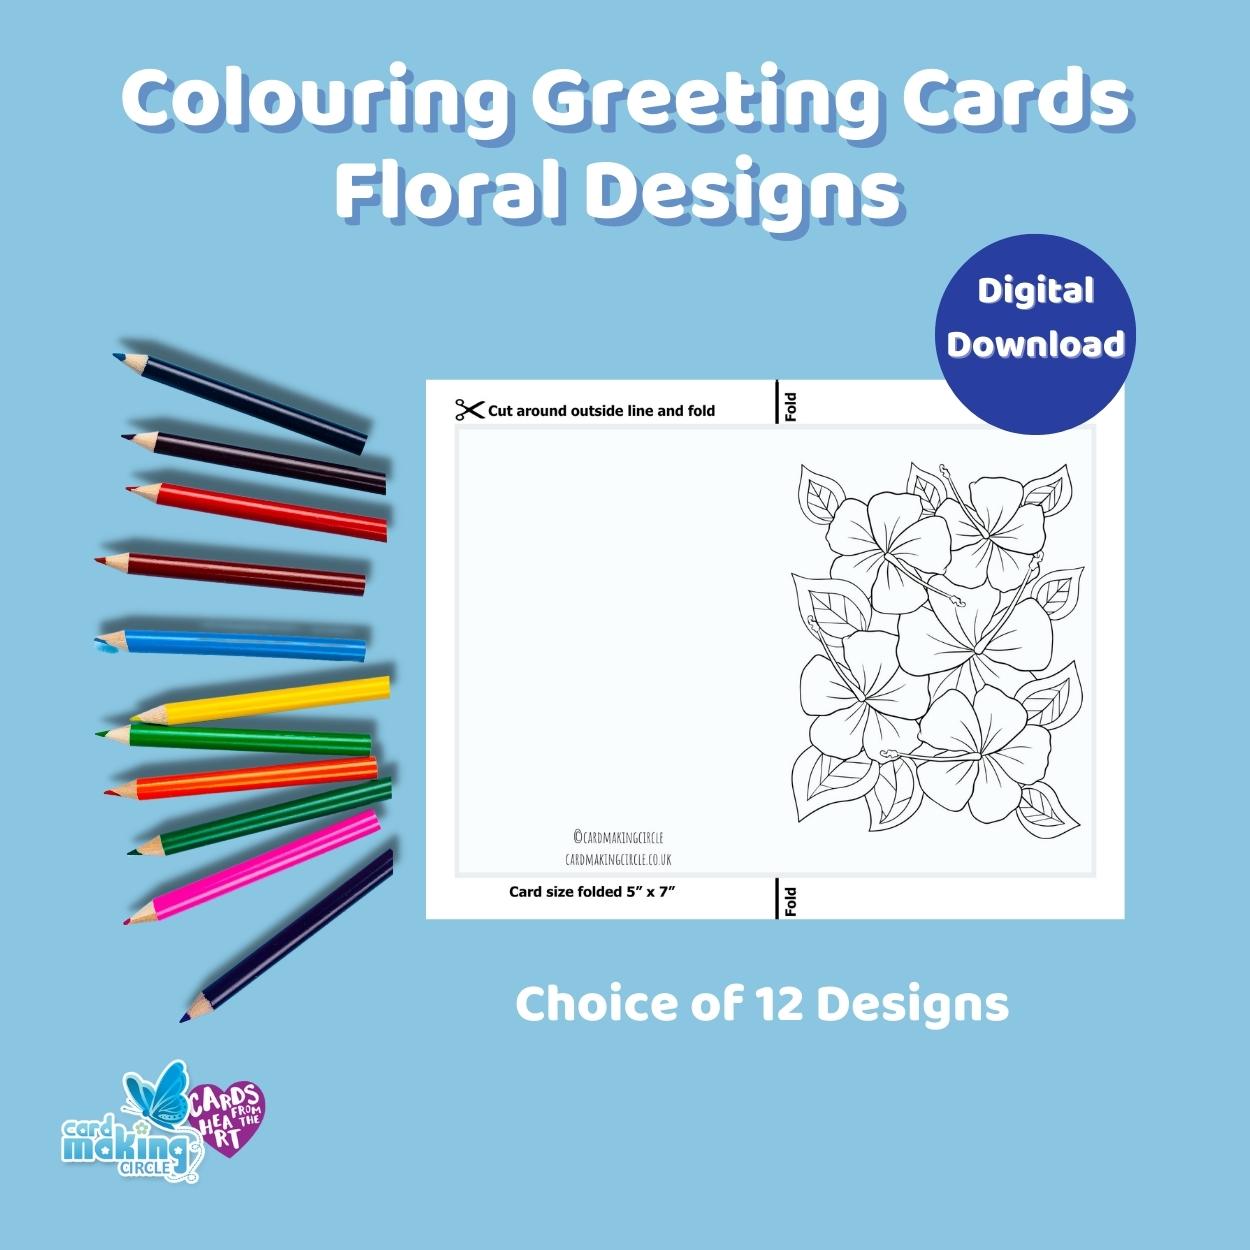 Create your own unique and memorable handmade cards with my ready to use floral colouring greeting cards.